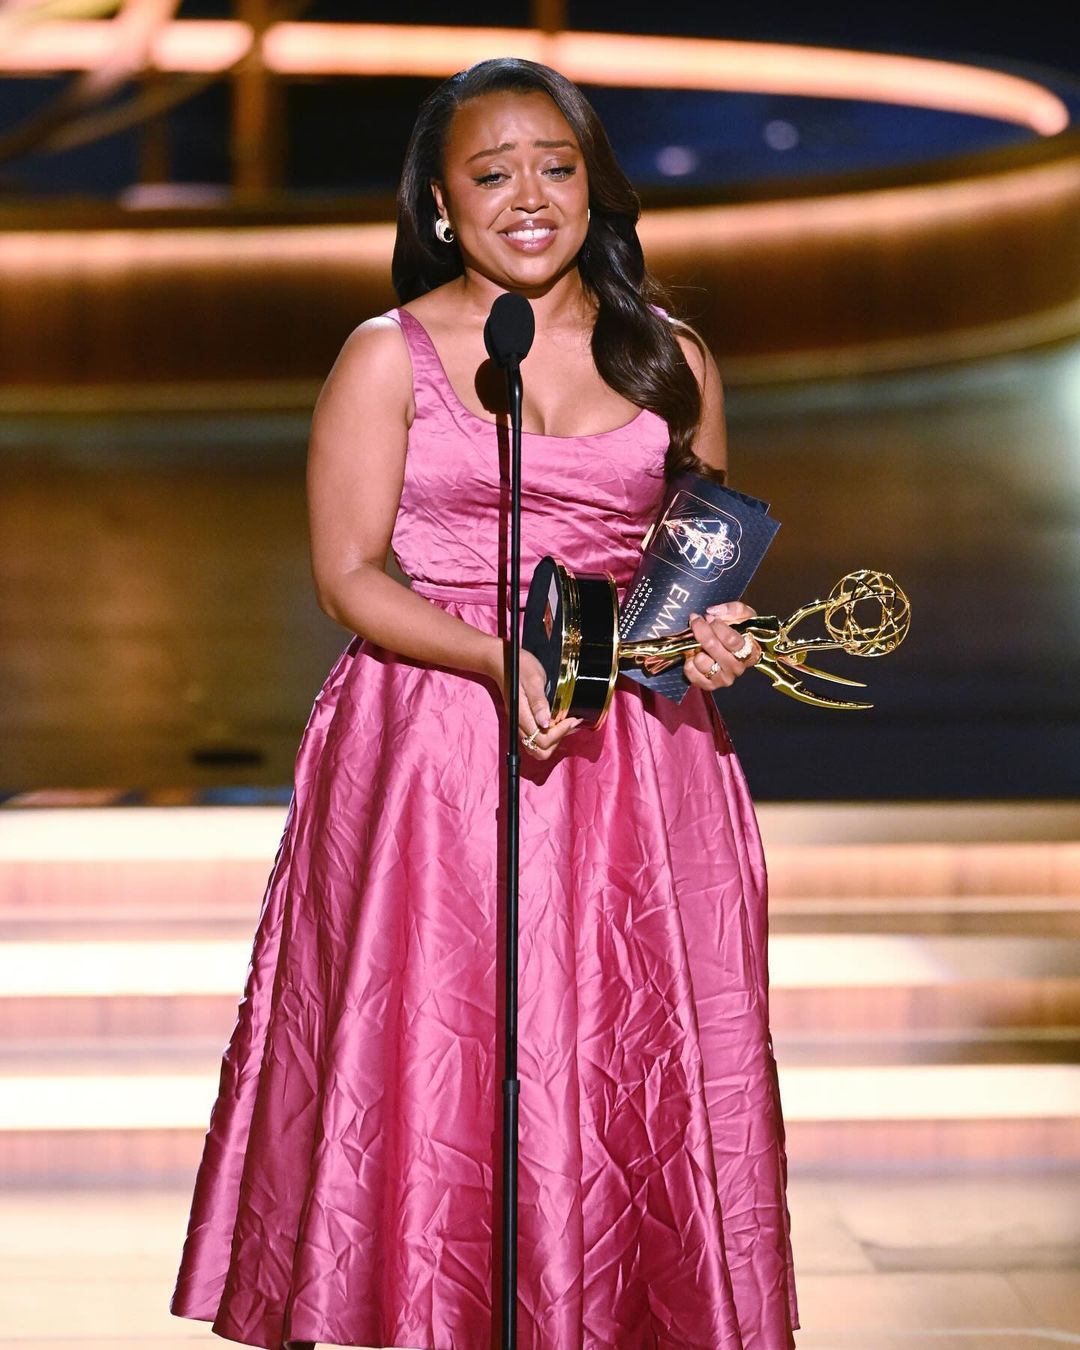 Quinta Brunson won the trophy for Best Lead Actress in a Comedy